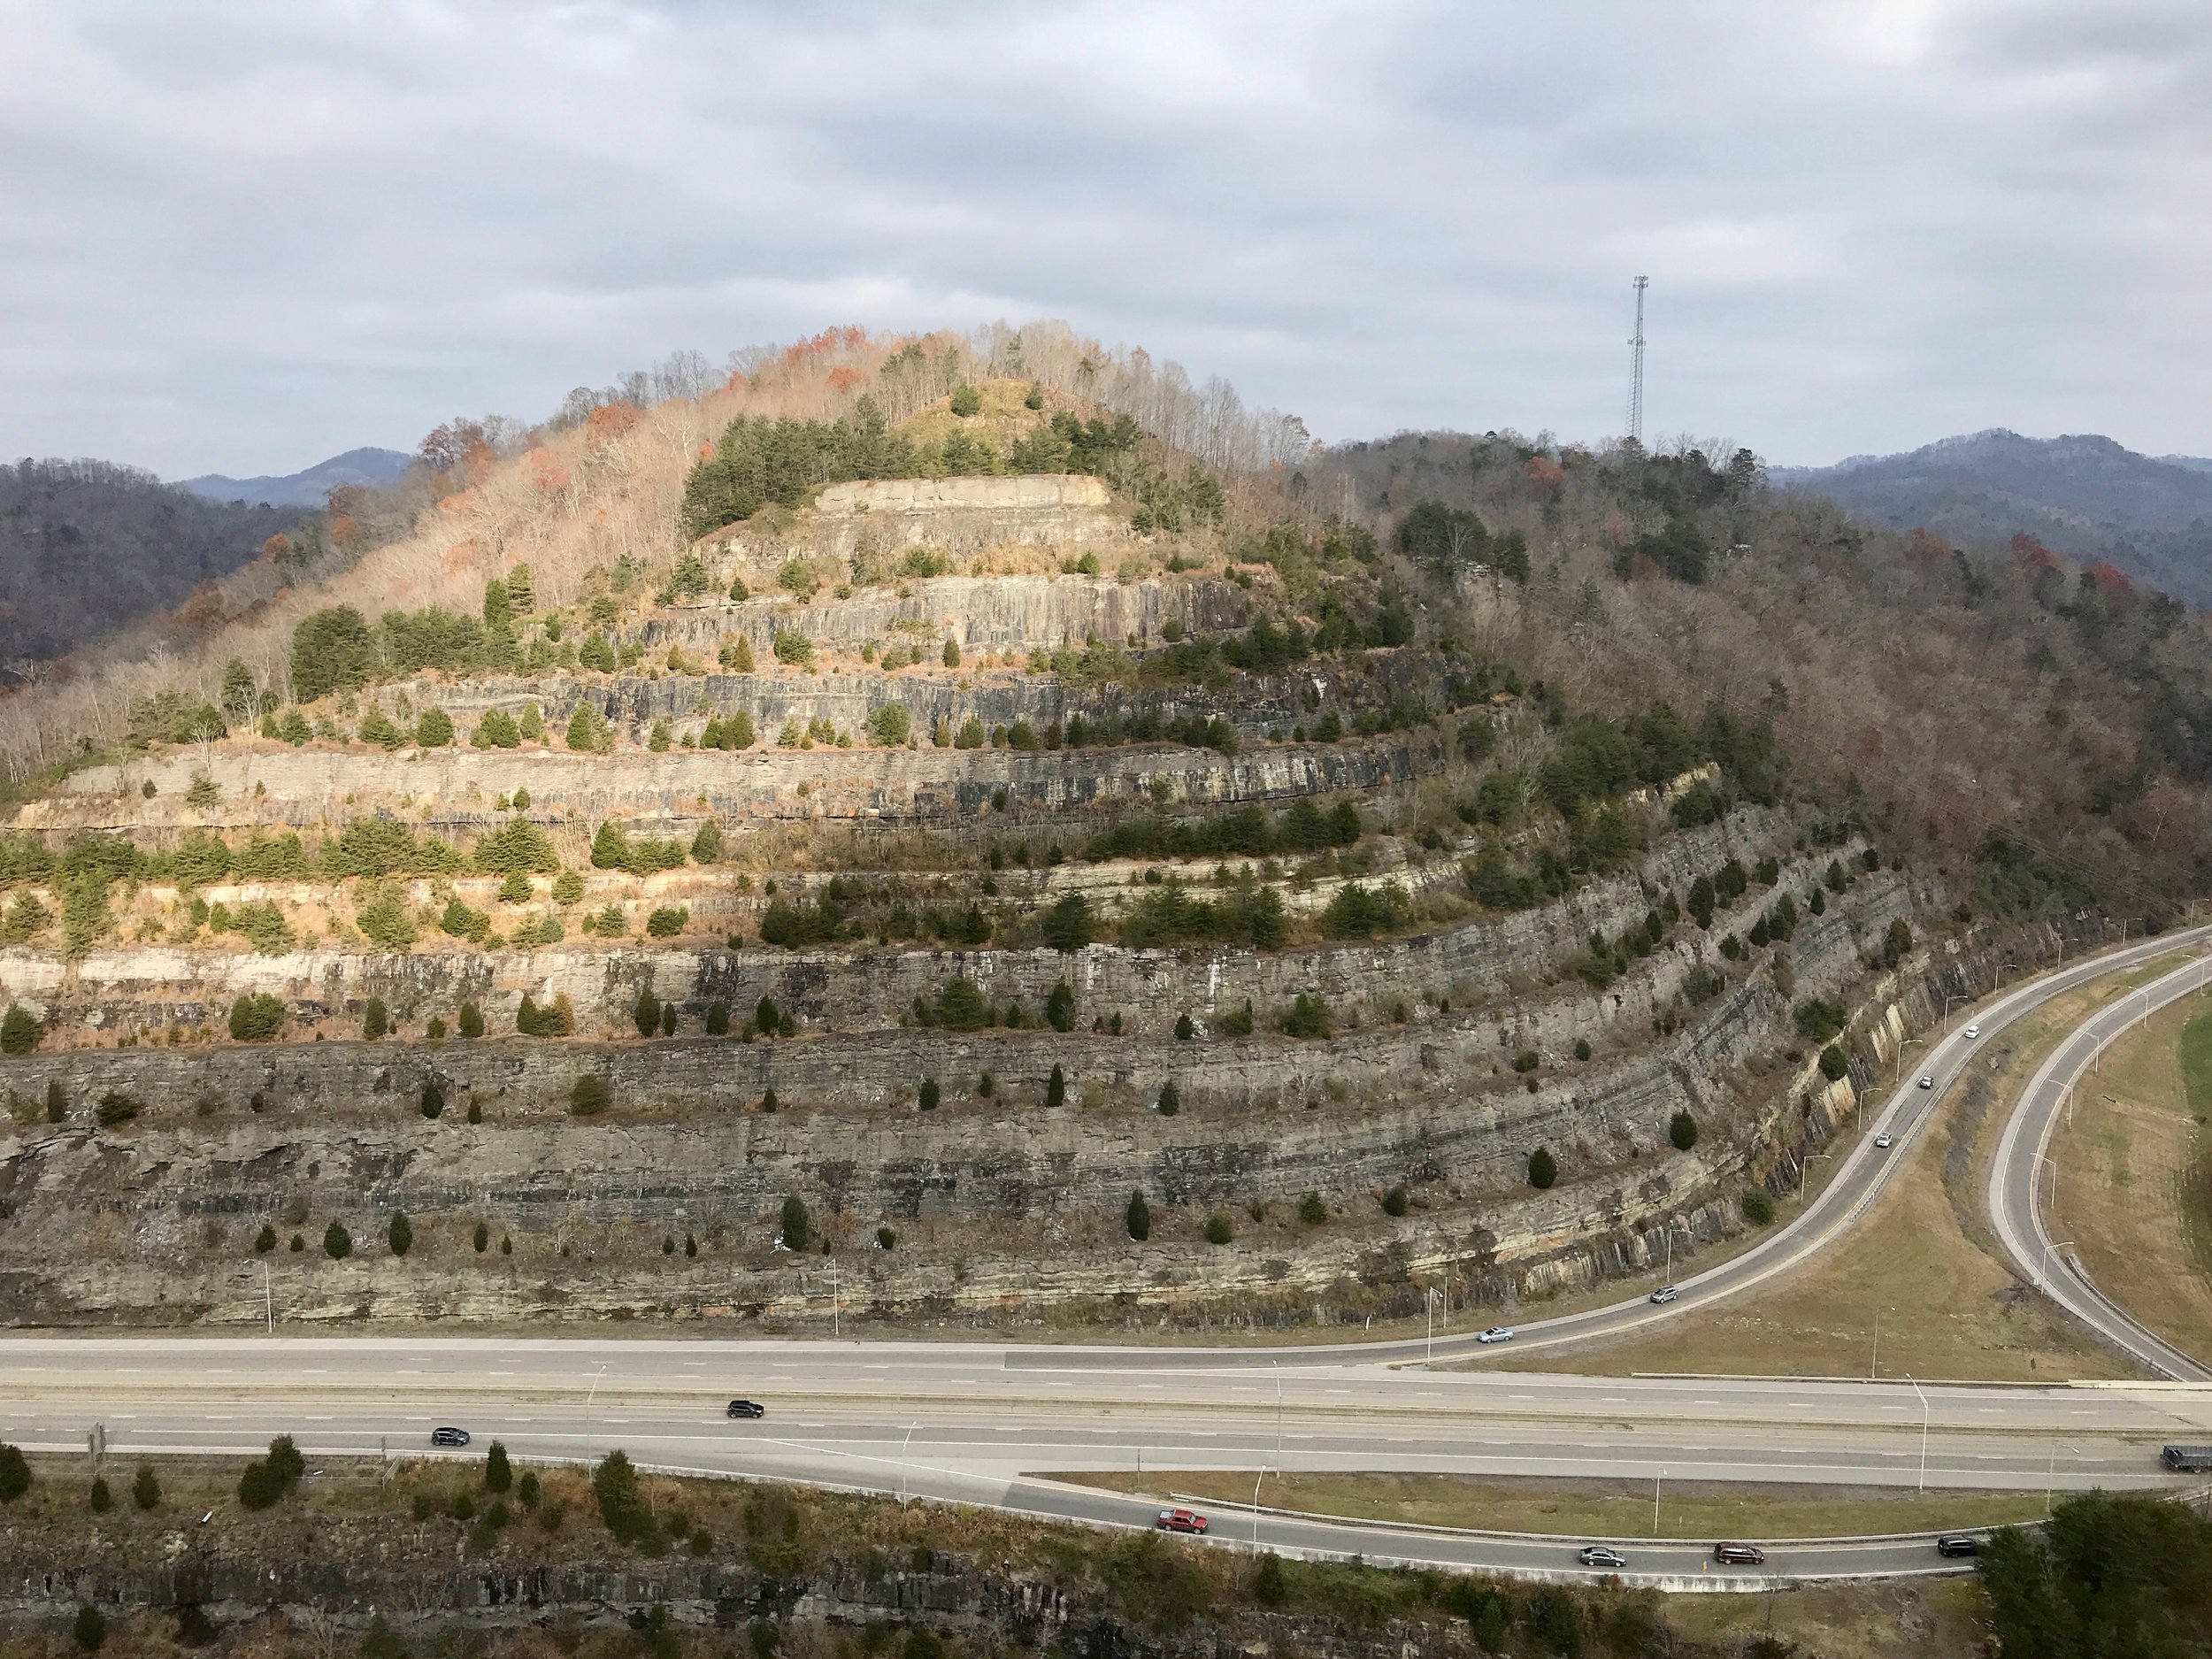  The Pikeville Cut-Through project removed a section of Peach Orchard Mountain to provide a new route for a highway, railroad and river.      